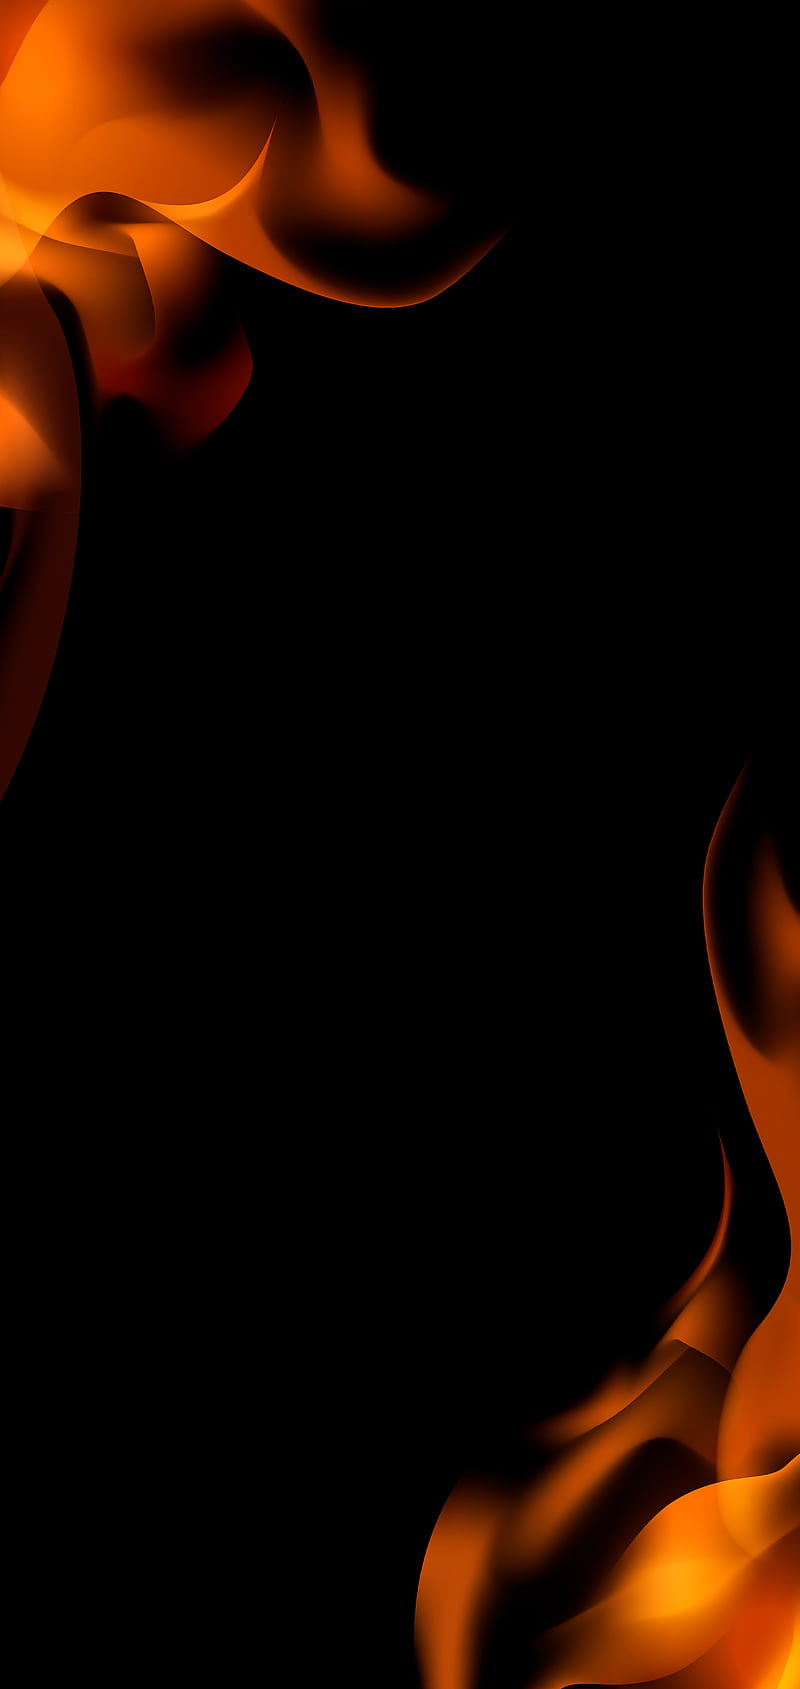 70+ Fire Backgrounds - World of Printables